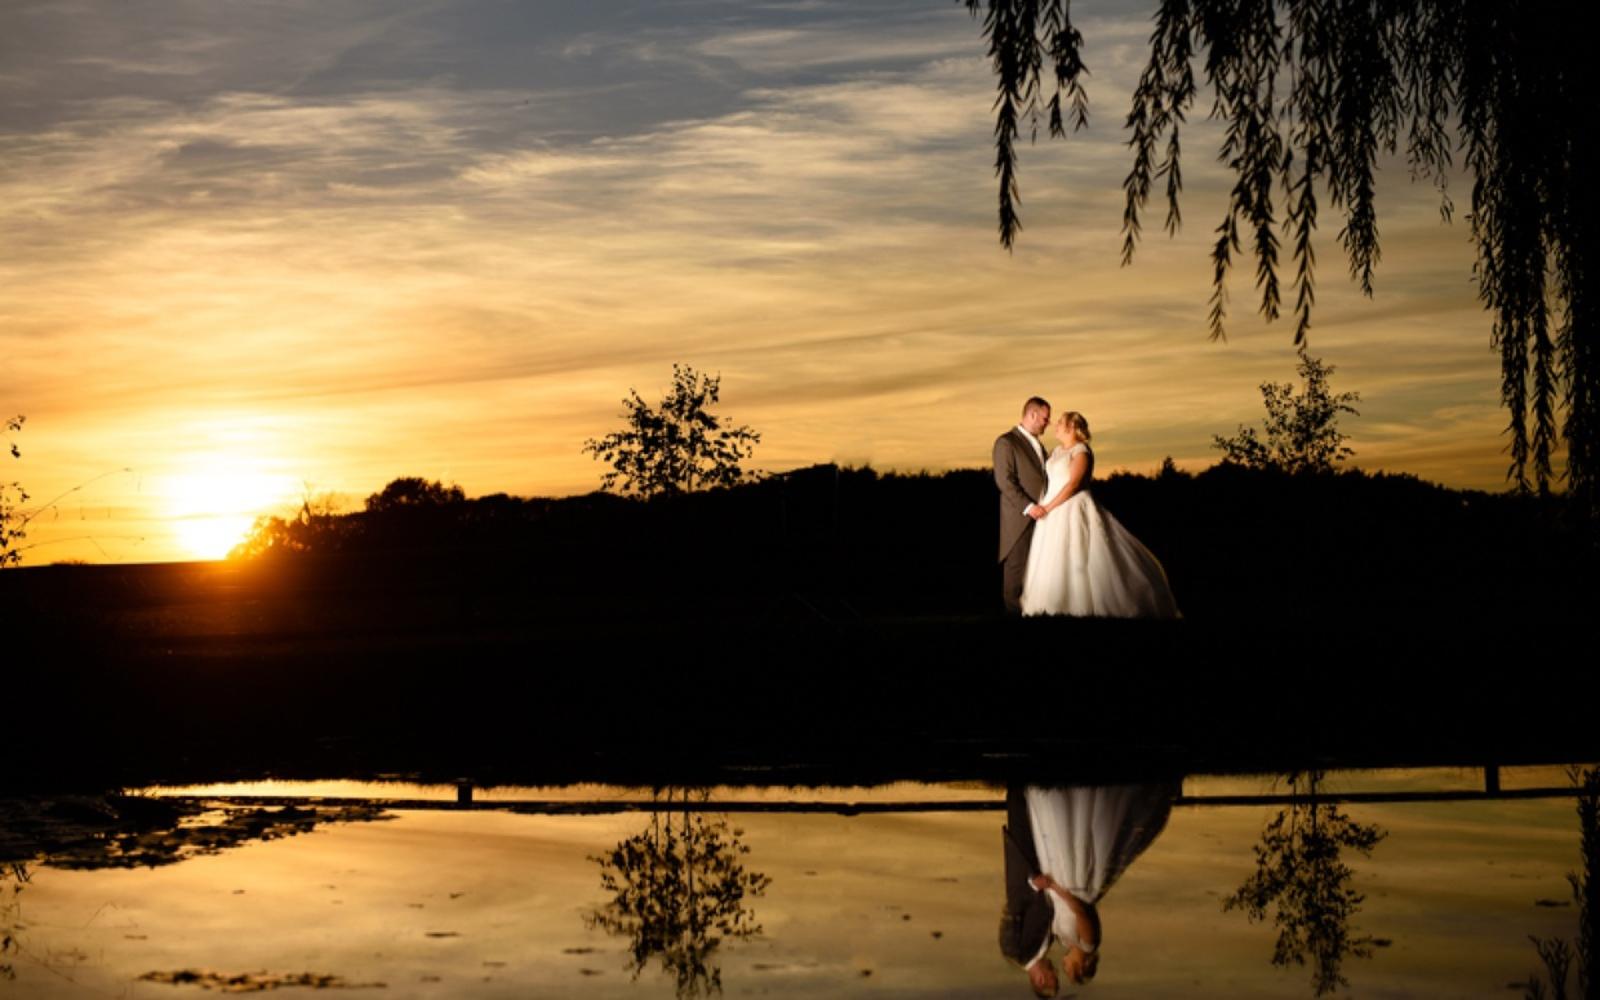 Steffen Milsom Photography Real Wedding Photographer Wiltshire Caswell House Oxfordshire sunset image